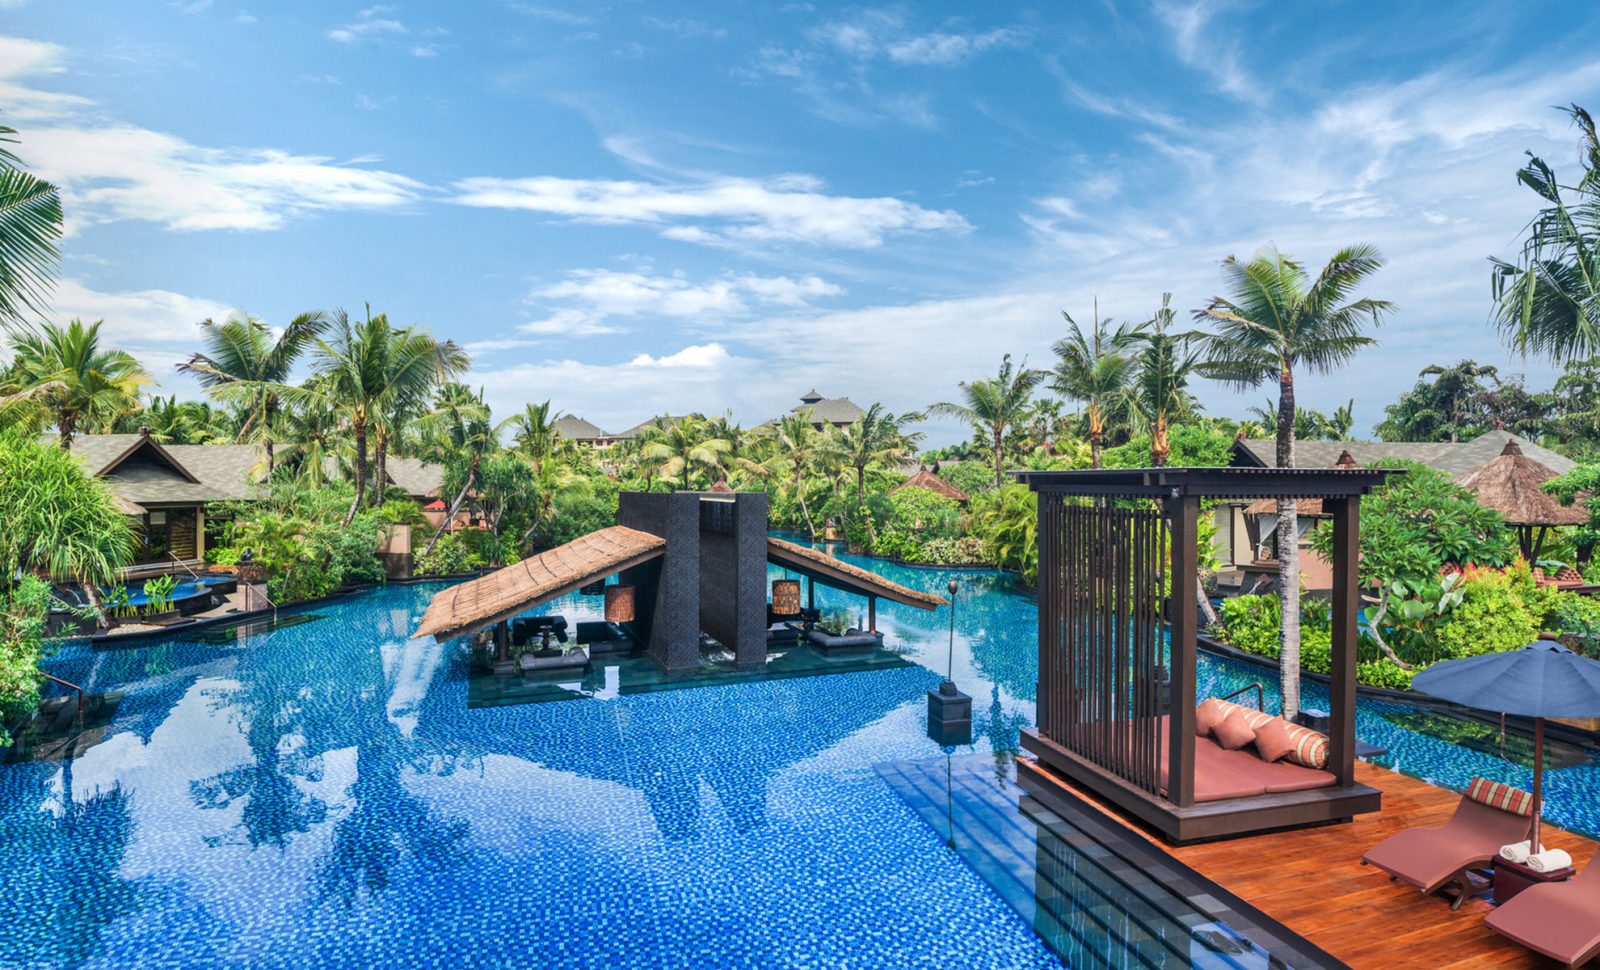 The St Regis Bali Resort Luxury Bali Holiday Booking All Inclusive